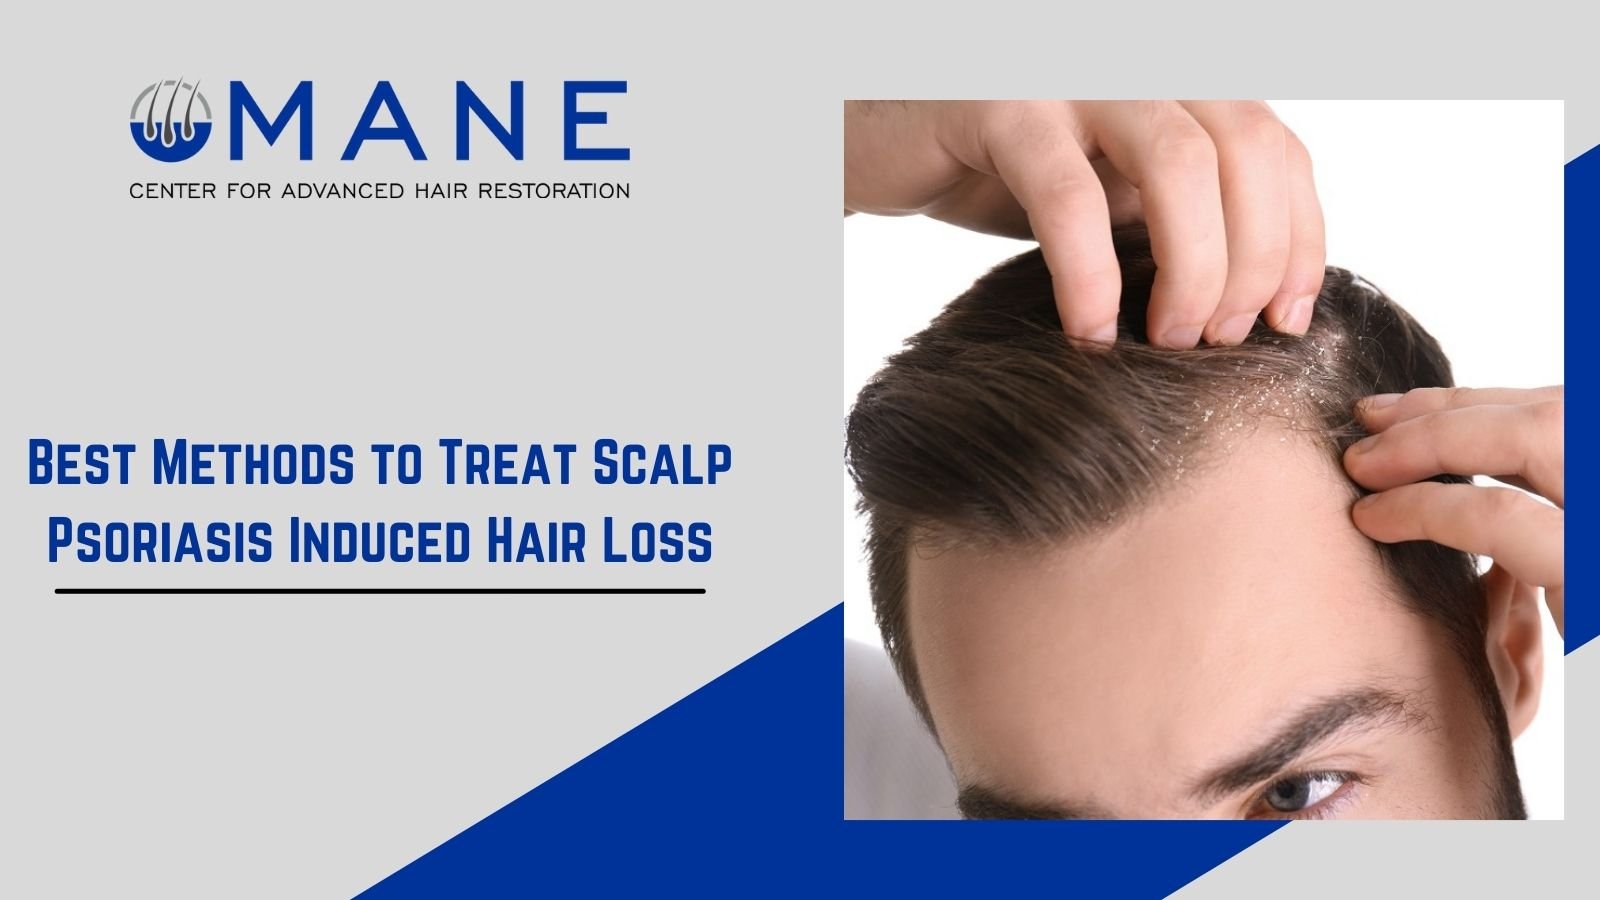 Best Methods to Treat Scalp Psoriasis Induced Hair Loss